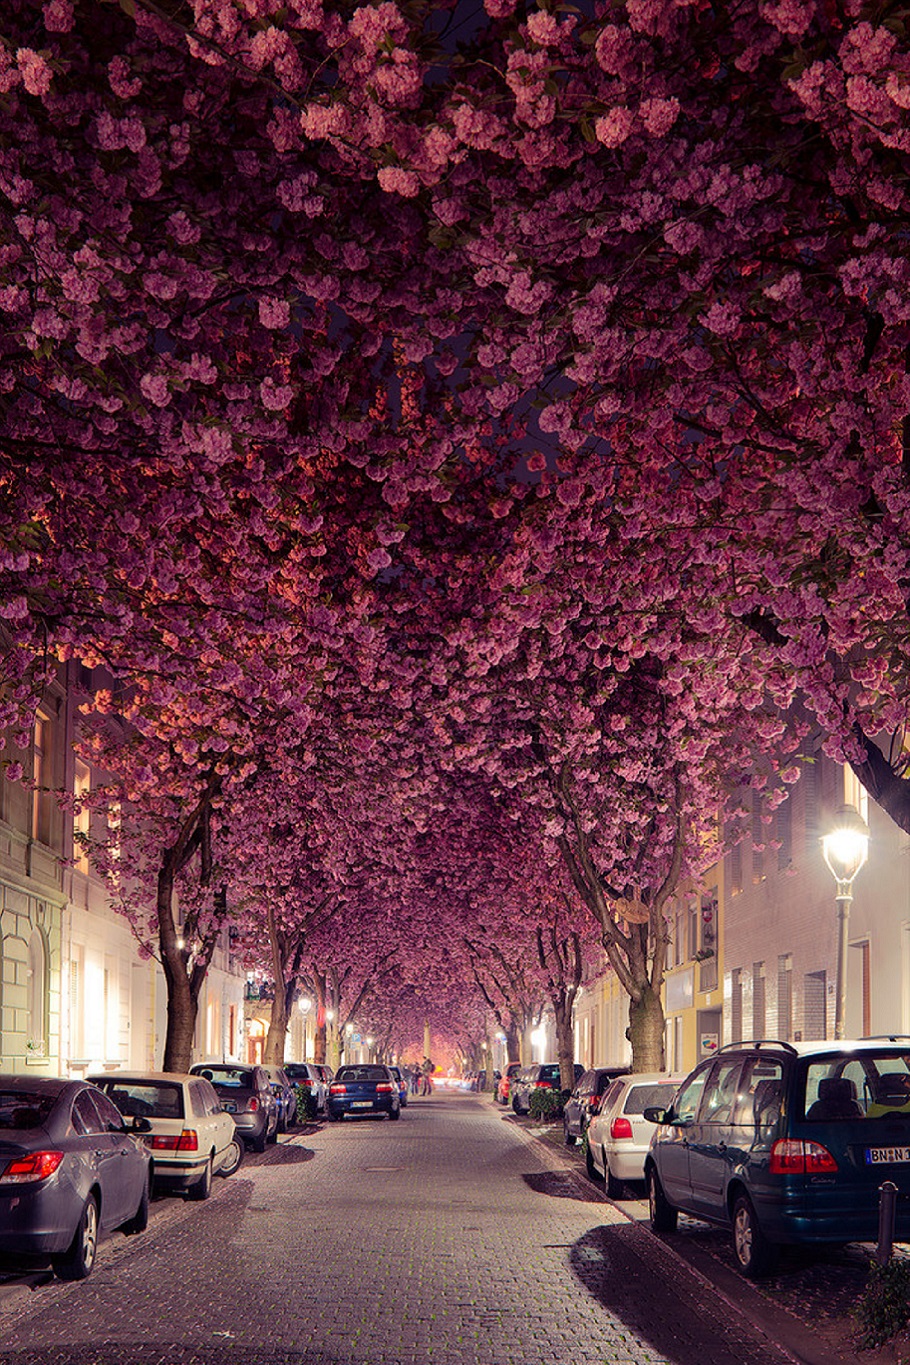 cool pic of a tree lined street in full bloom